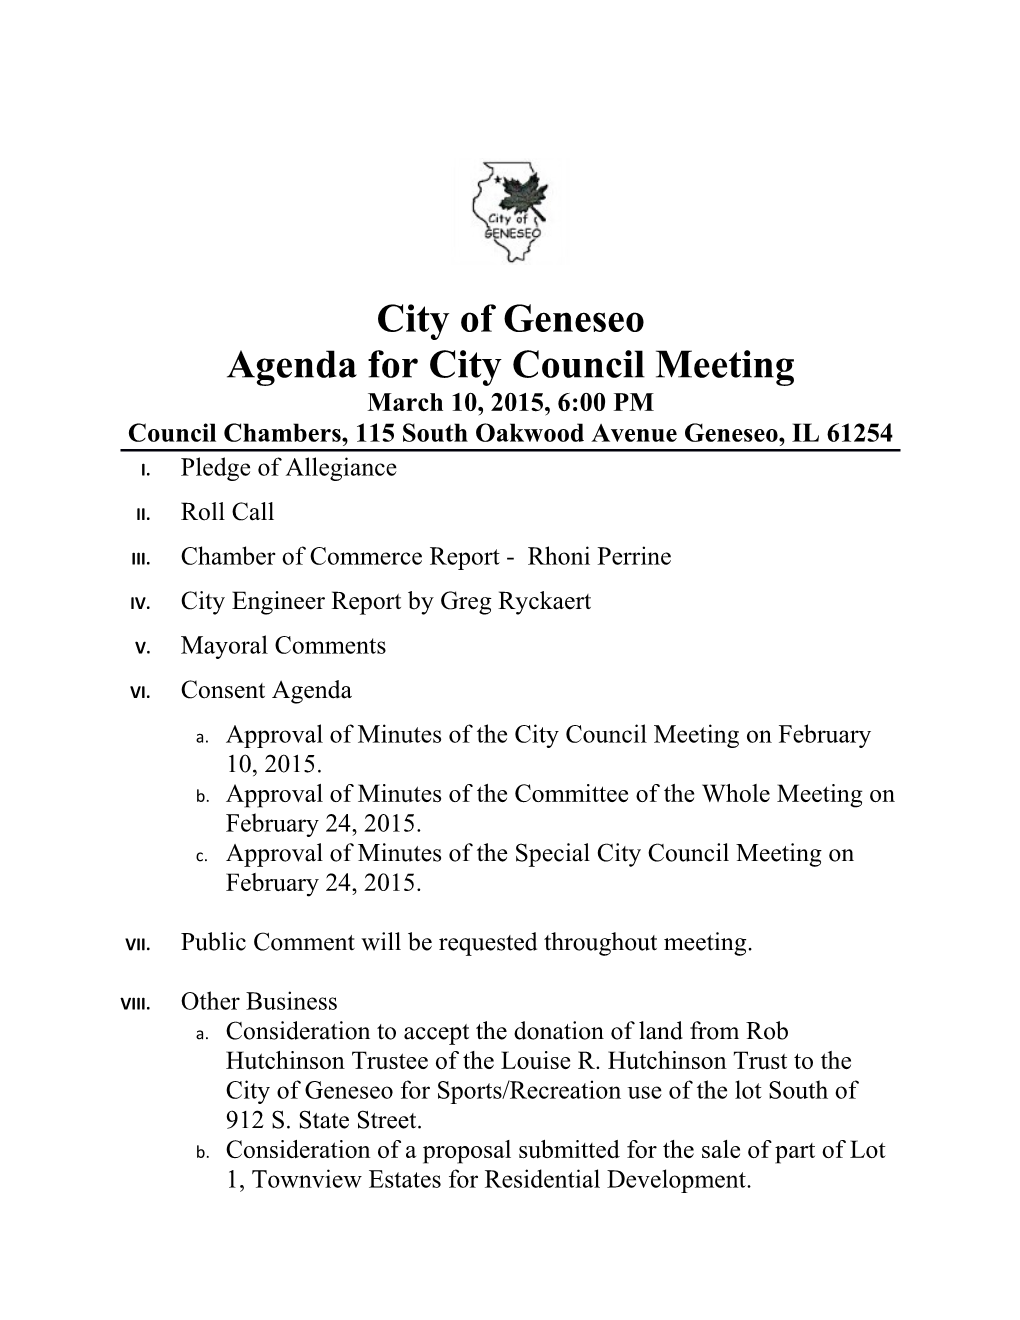 Agenda for City Council Meeting